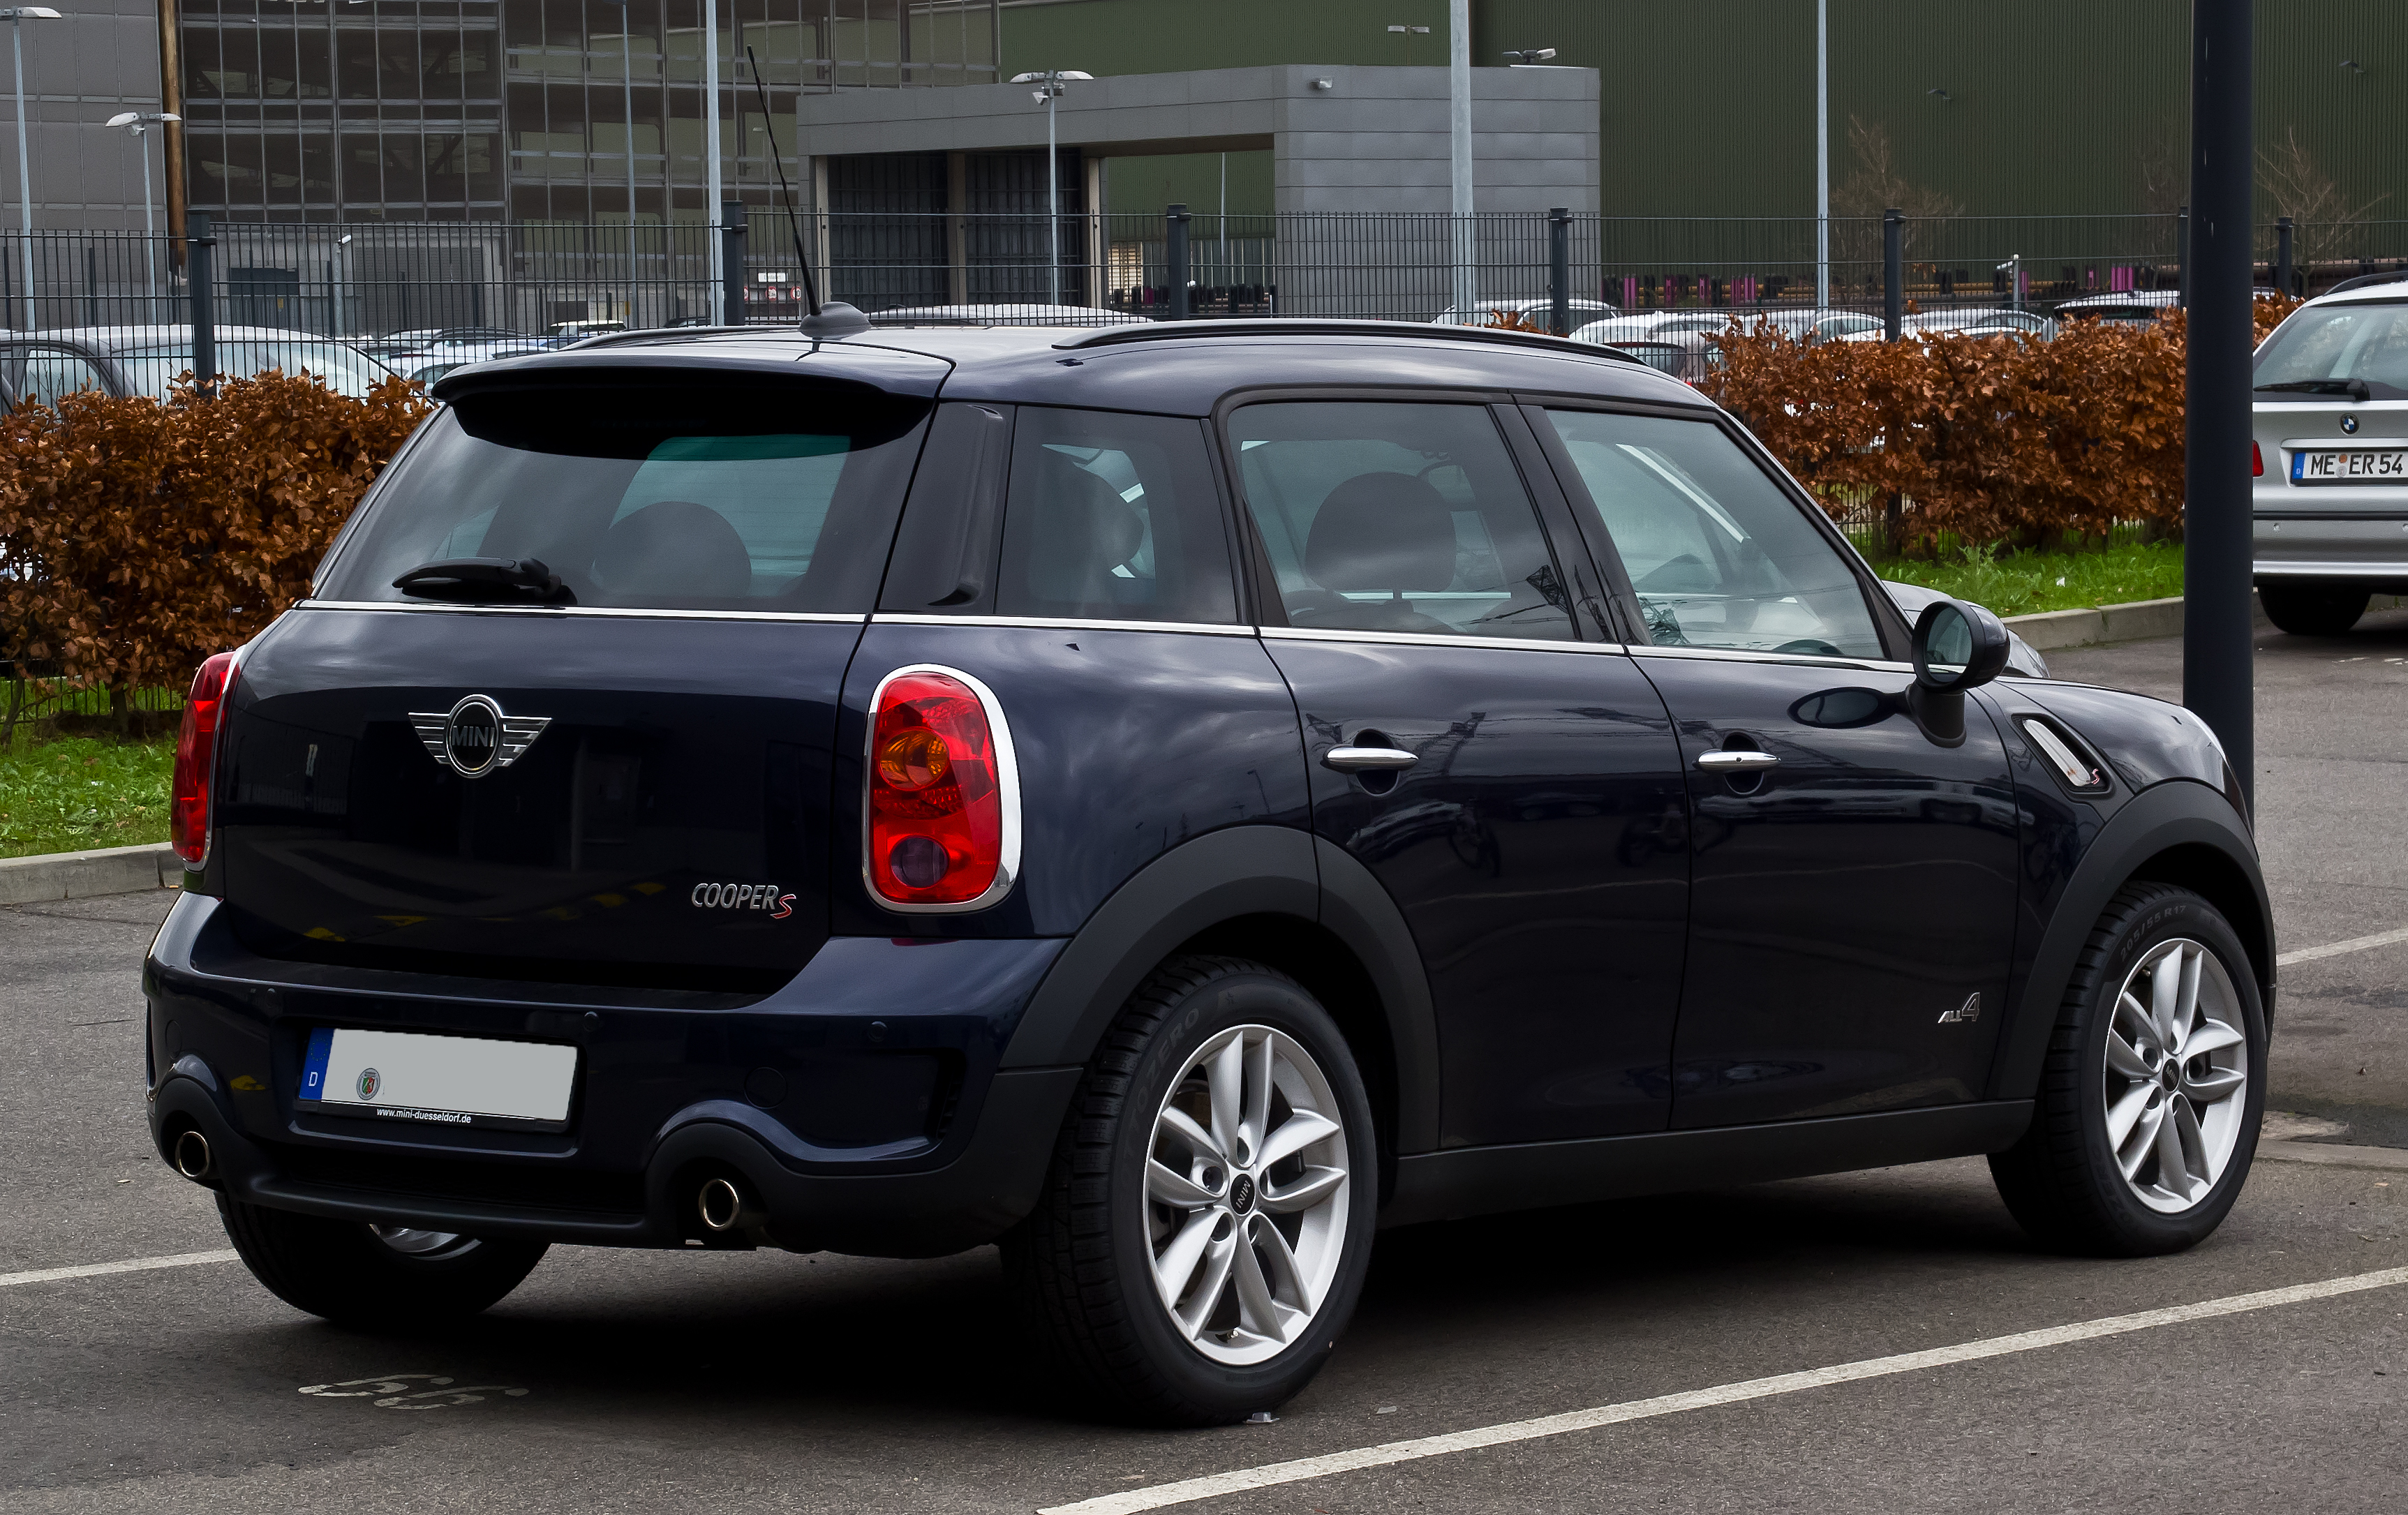 MINI Clubman exterior specifications